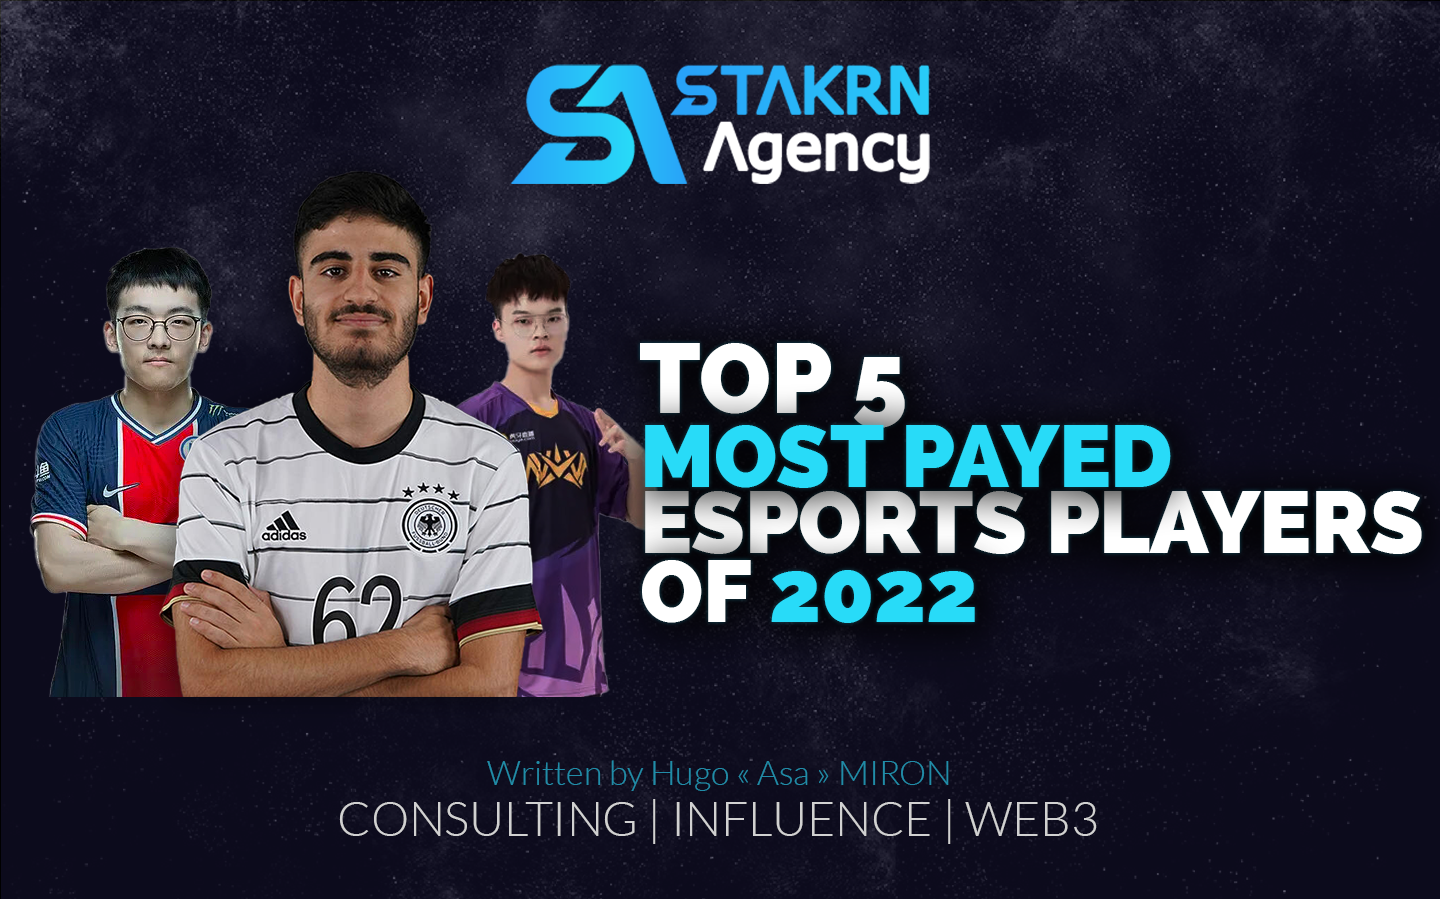 TOP 5 most payed esports players of 2022